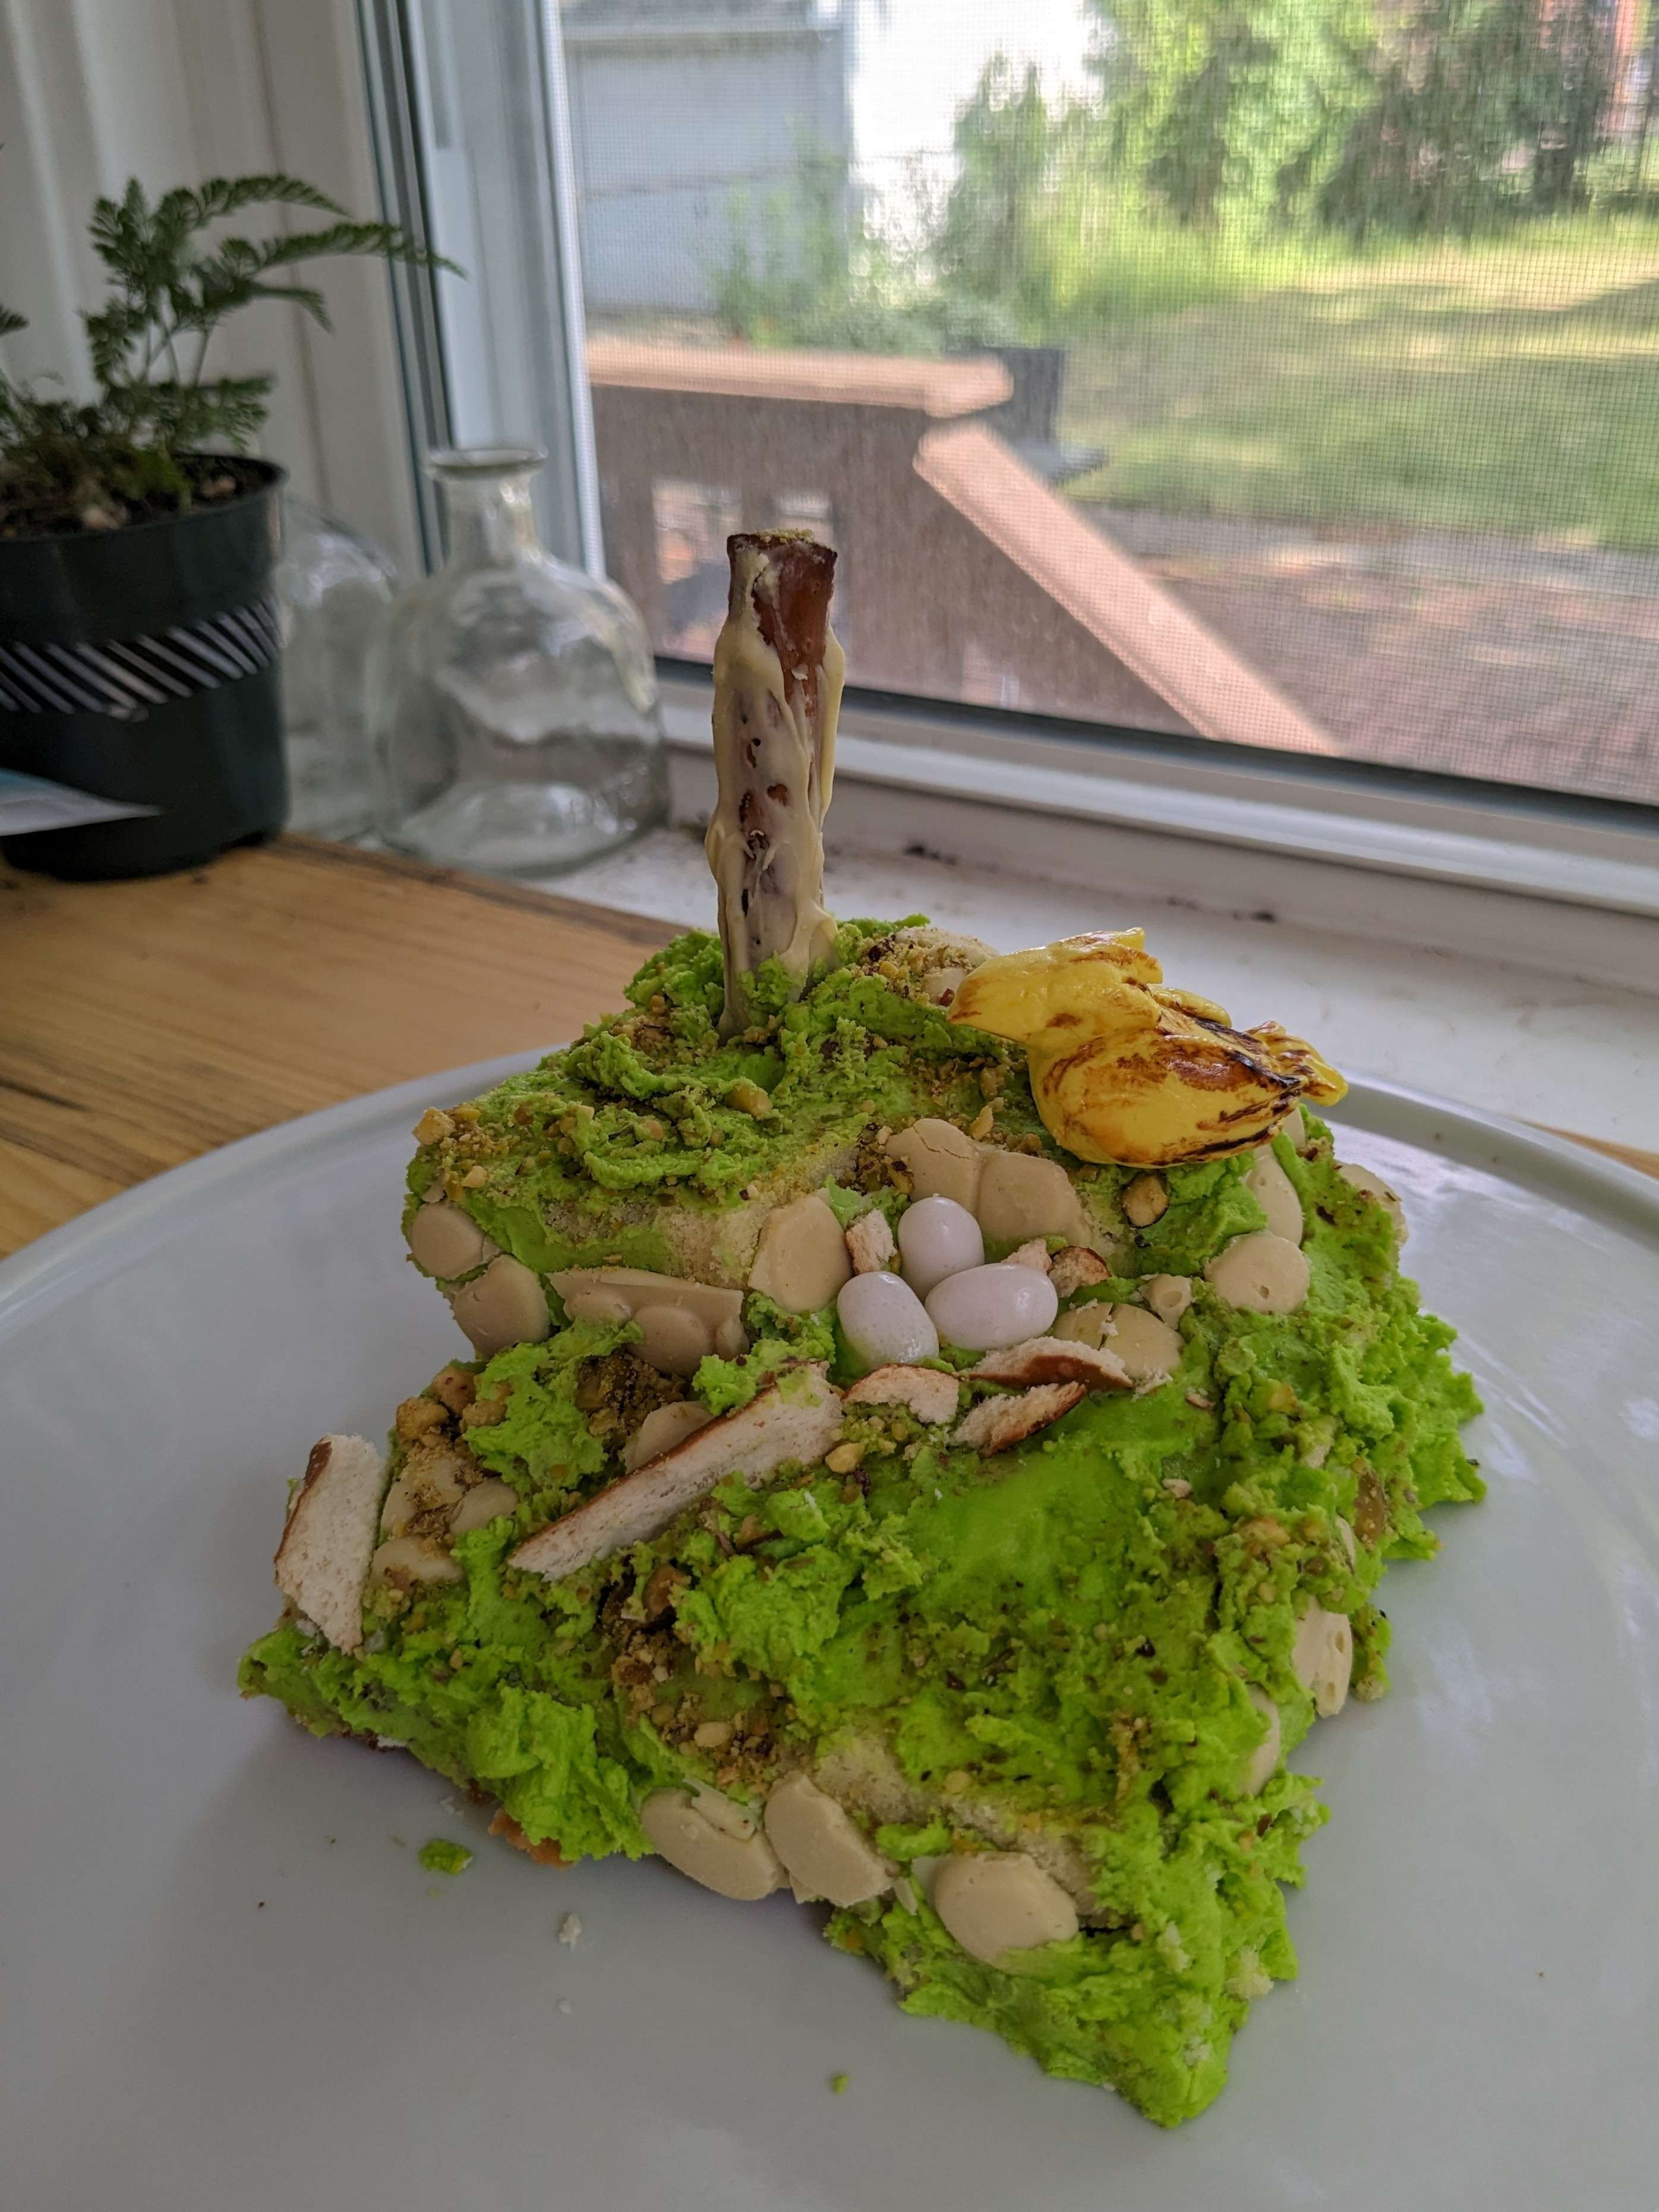 A cake in the shape of Araguay Woods, with Boco overlooking a nest of eggs